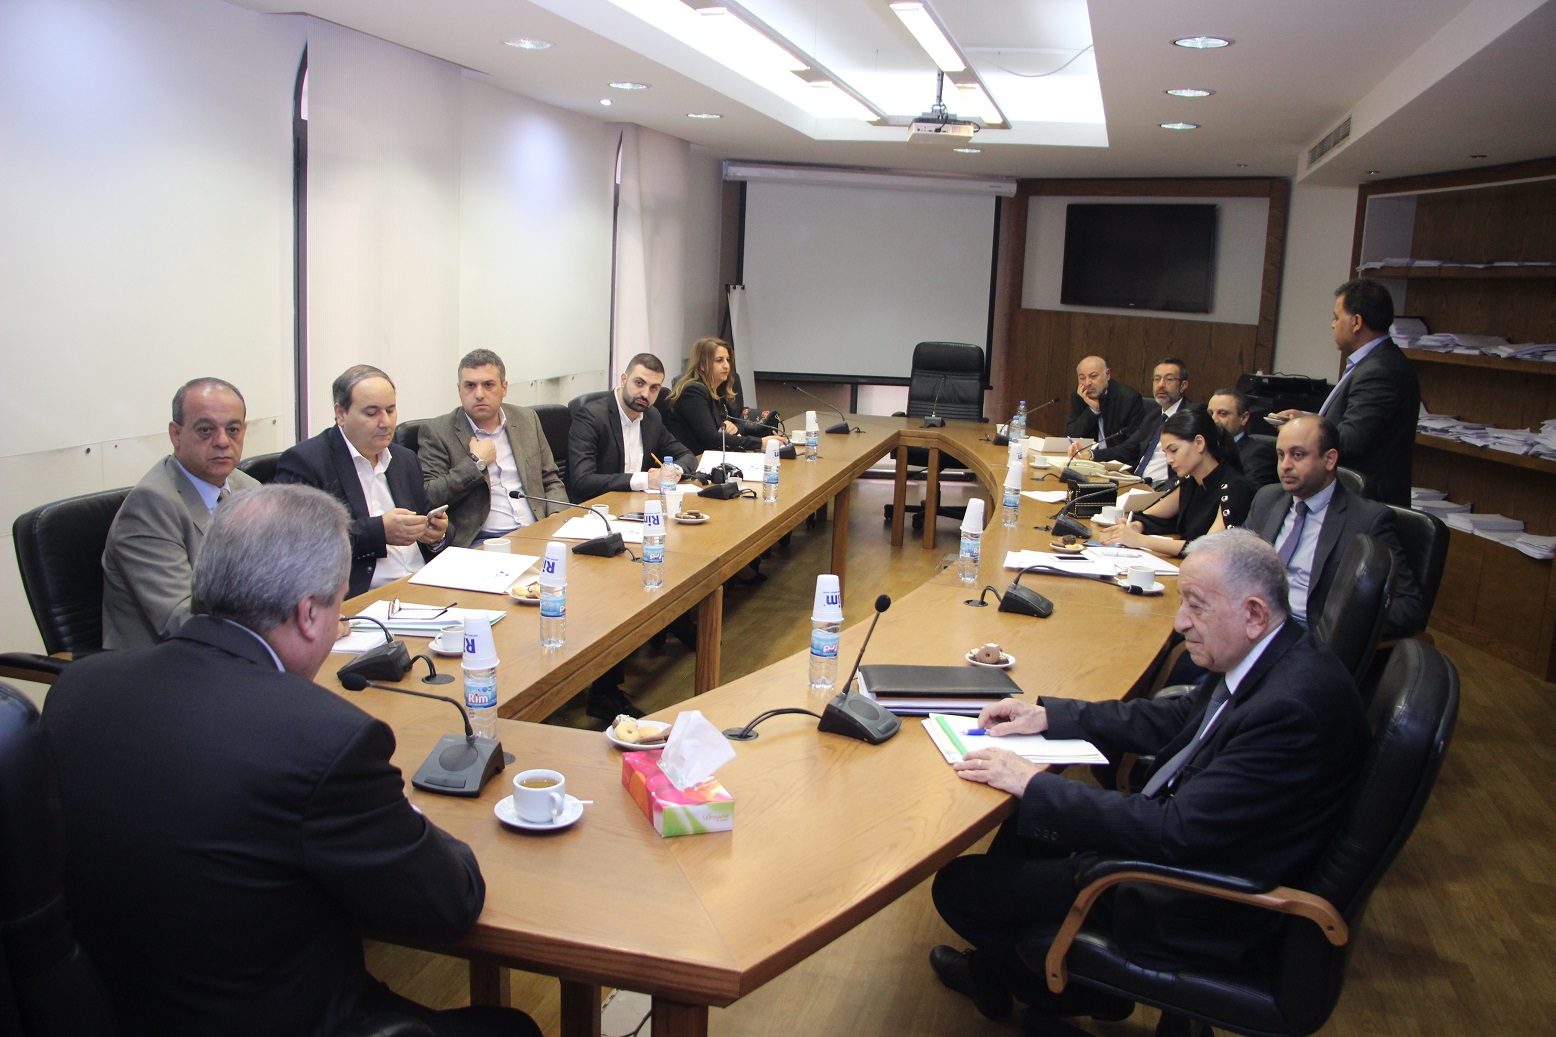 Fifth Steering Committee Meeting of the Project “Building a Rule of Law Society"